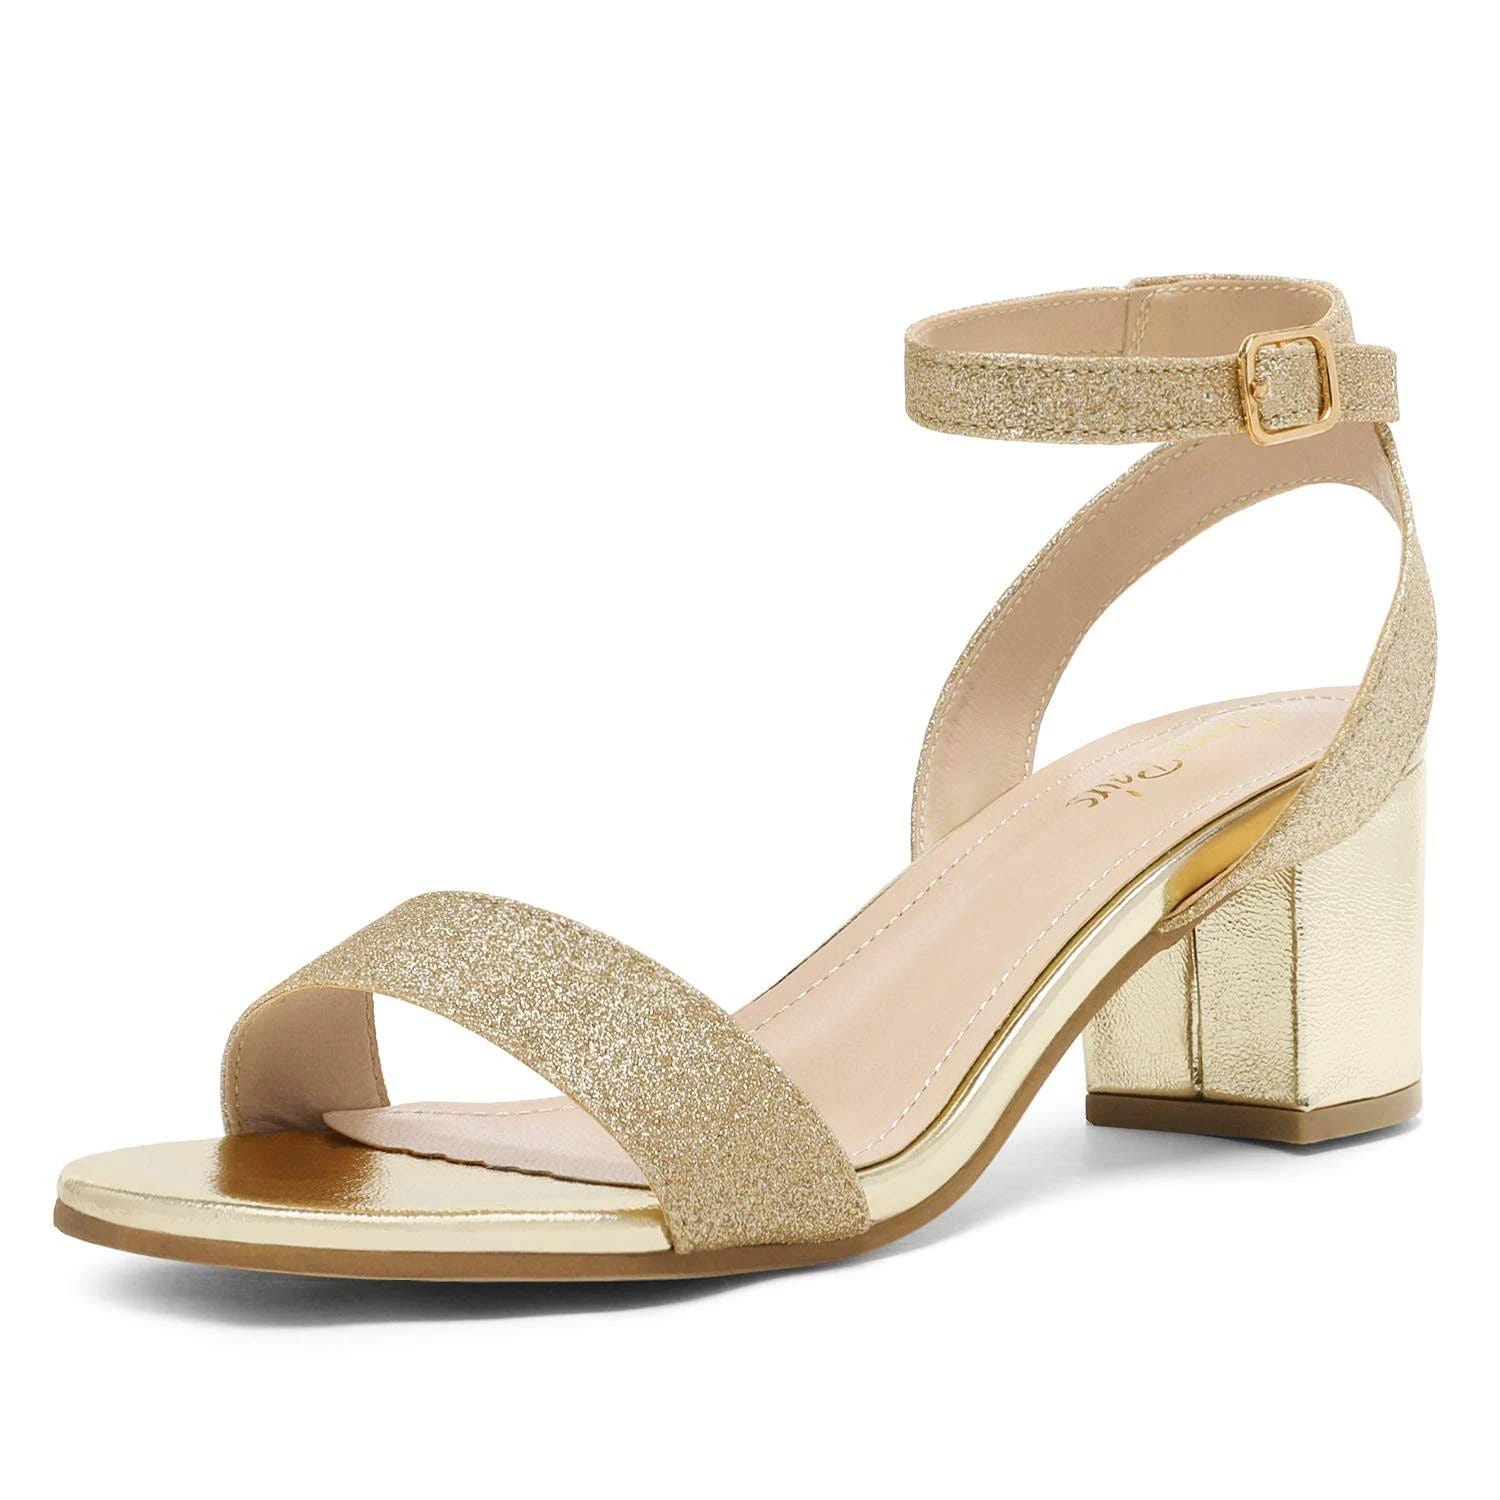 Chic Gold Open-Toe Sandals with Adjustable Ankle Strap and Latex Padding | Image